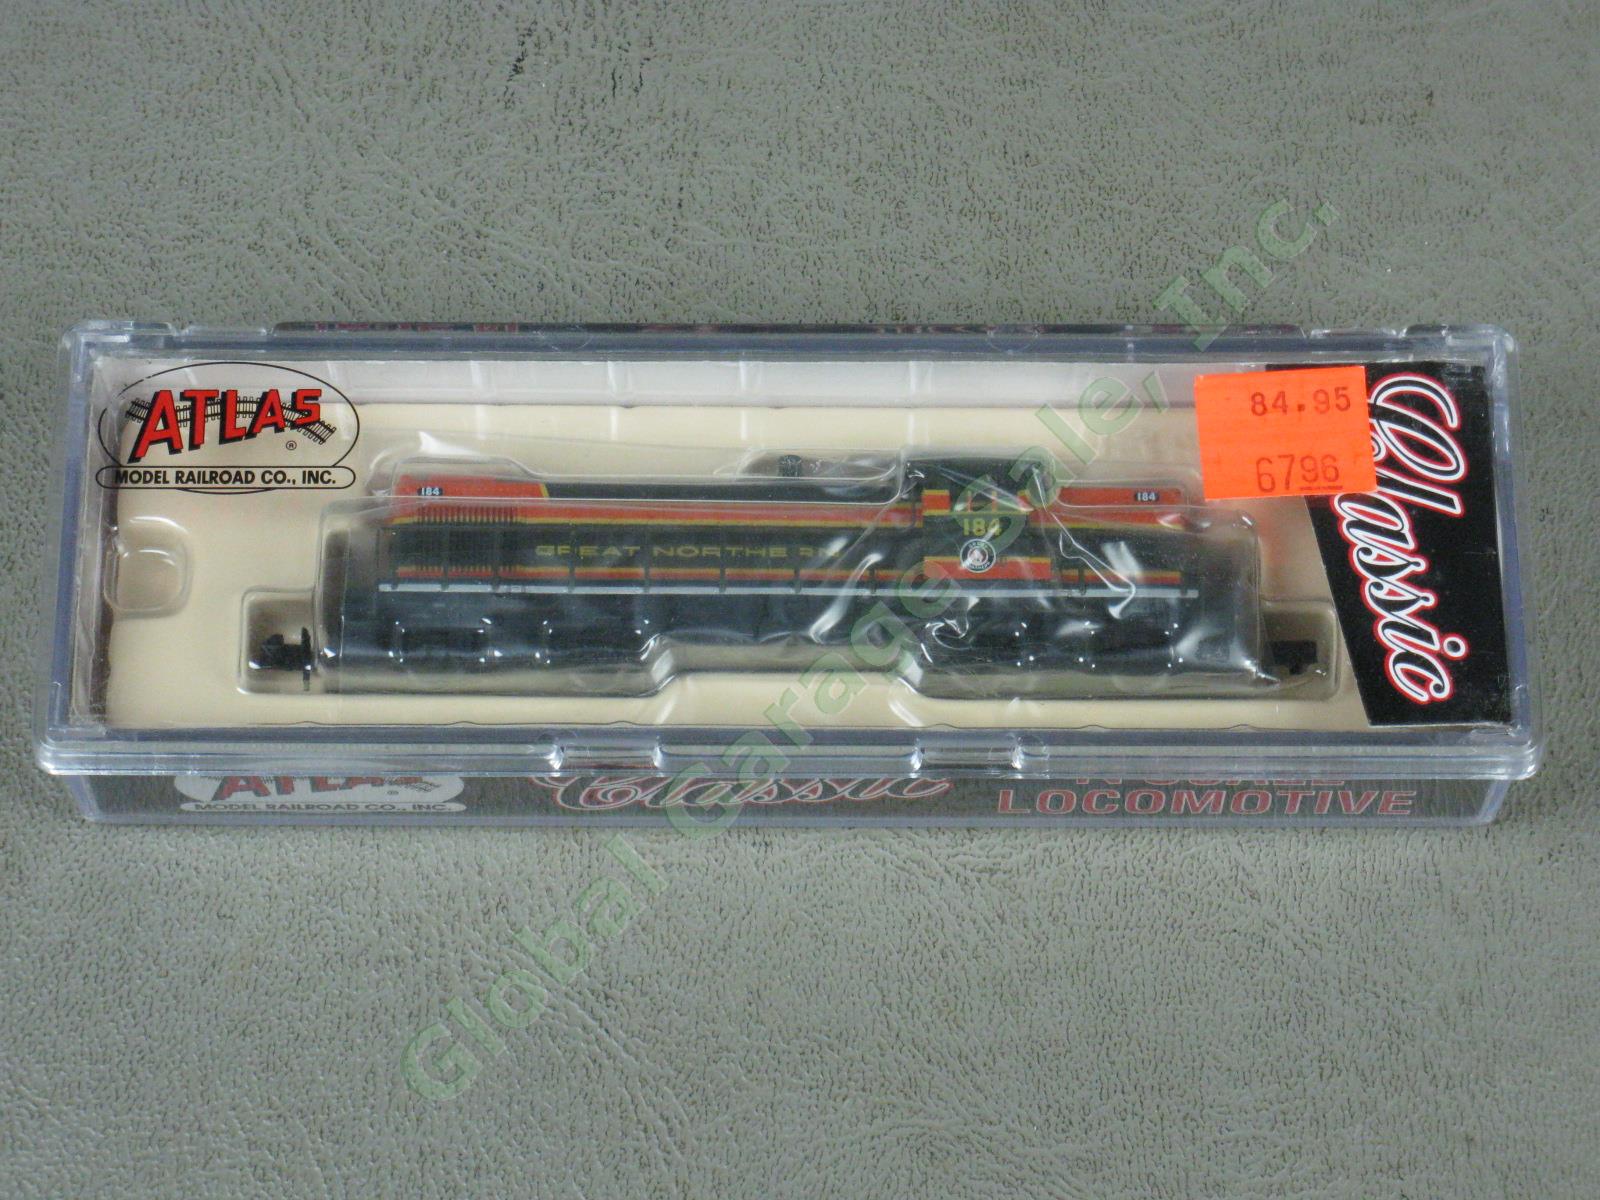 NEW Atlas N-Scale Locomotive 44006 RS-1 Alco Great Northern #184 GN Railroad